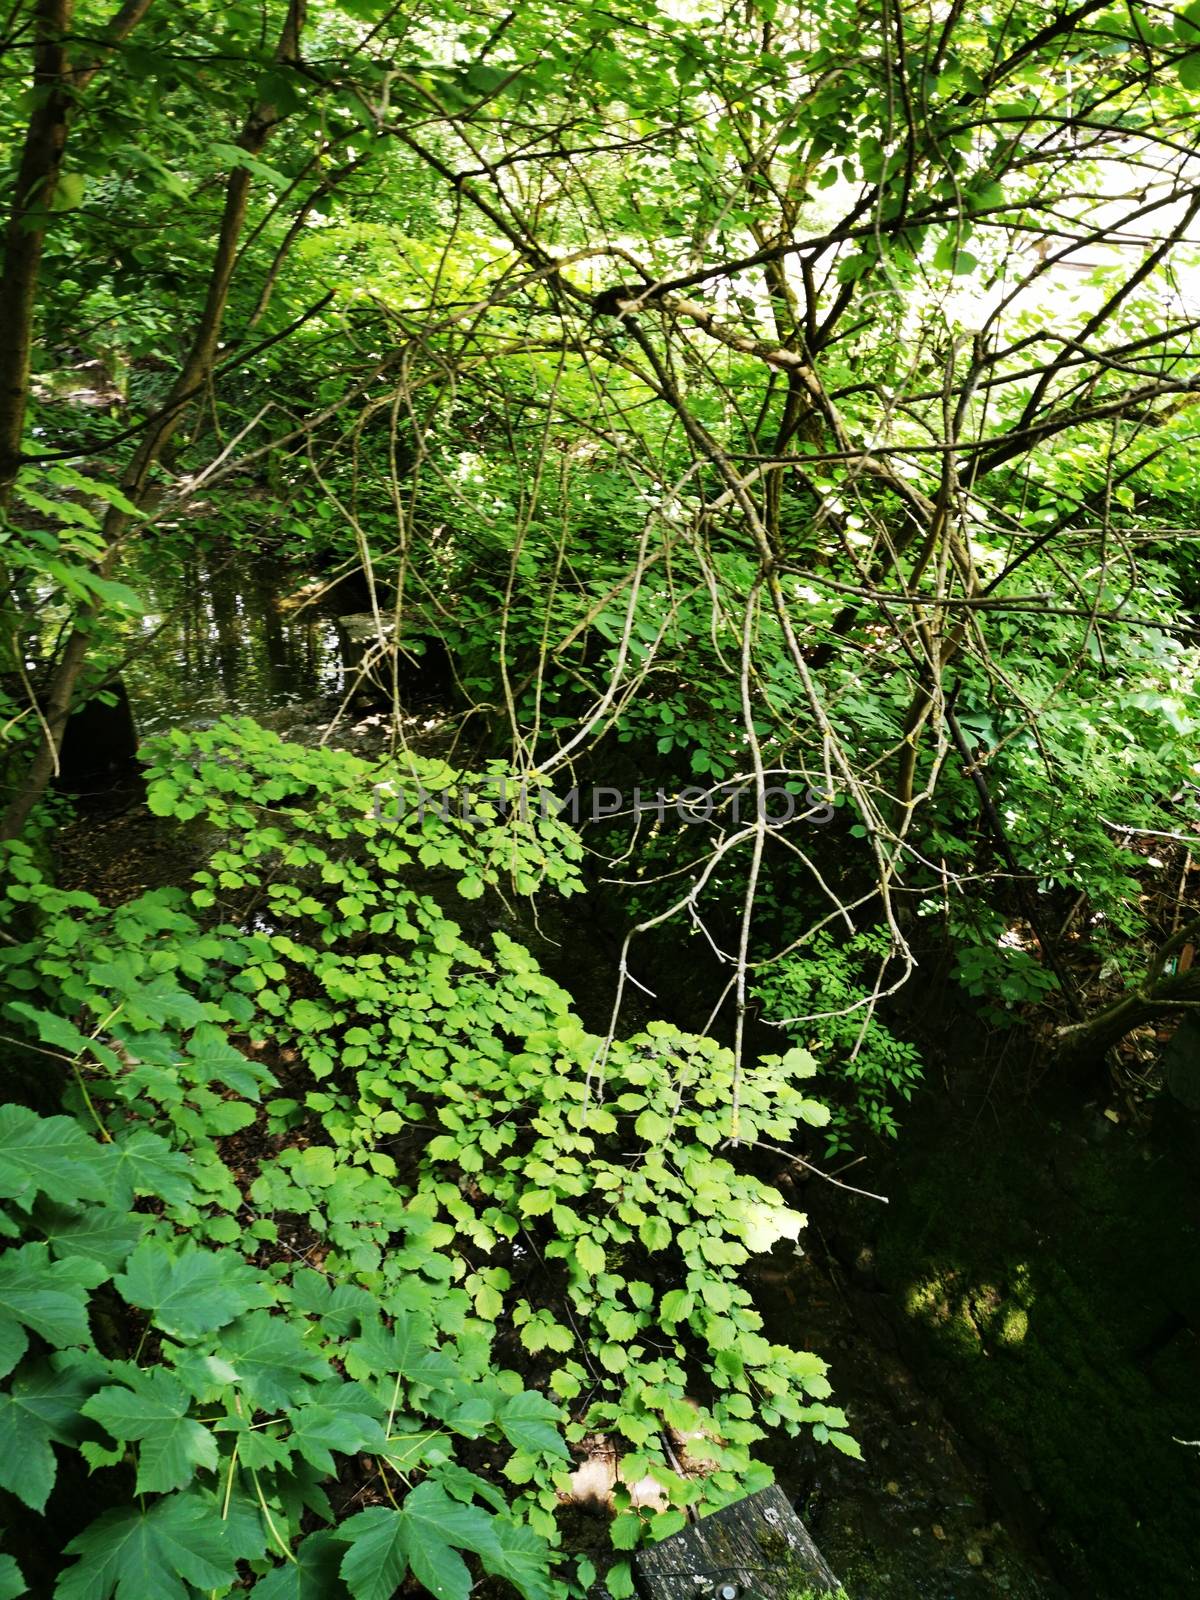 A green plant in a forest. High quality photo